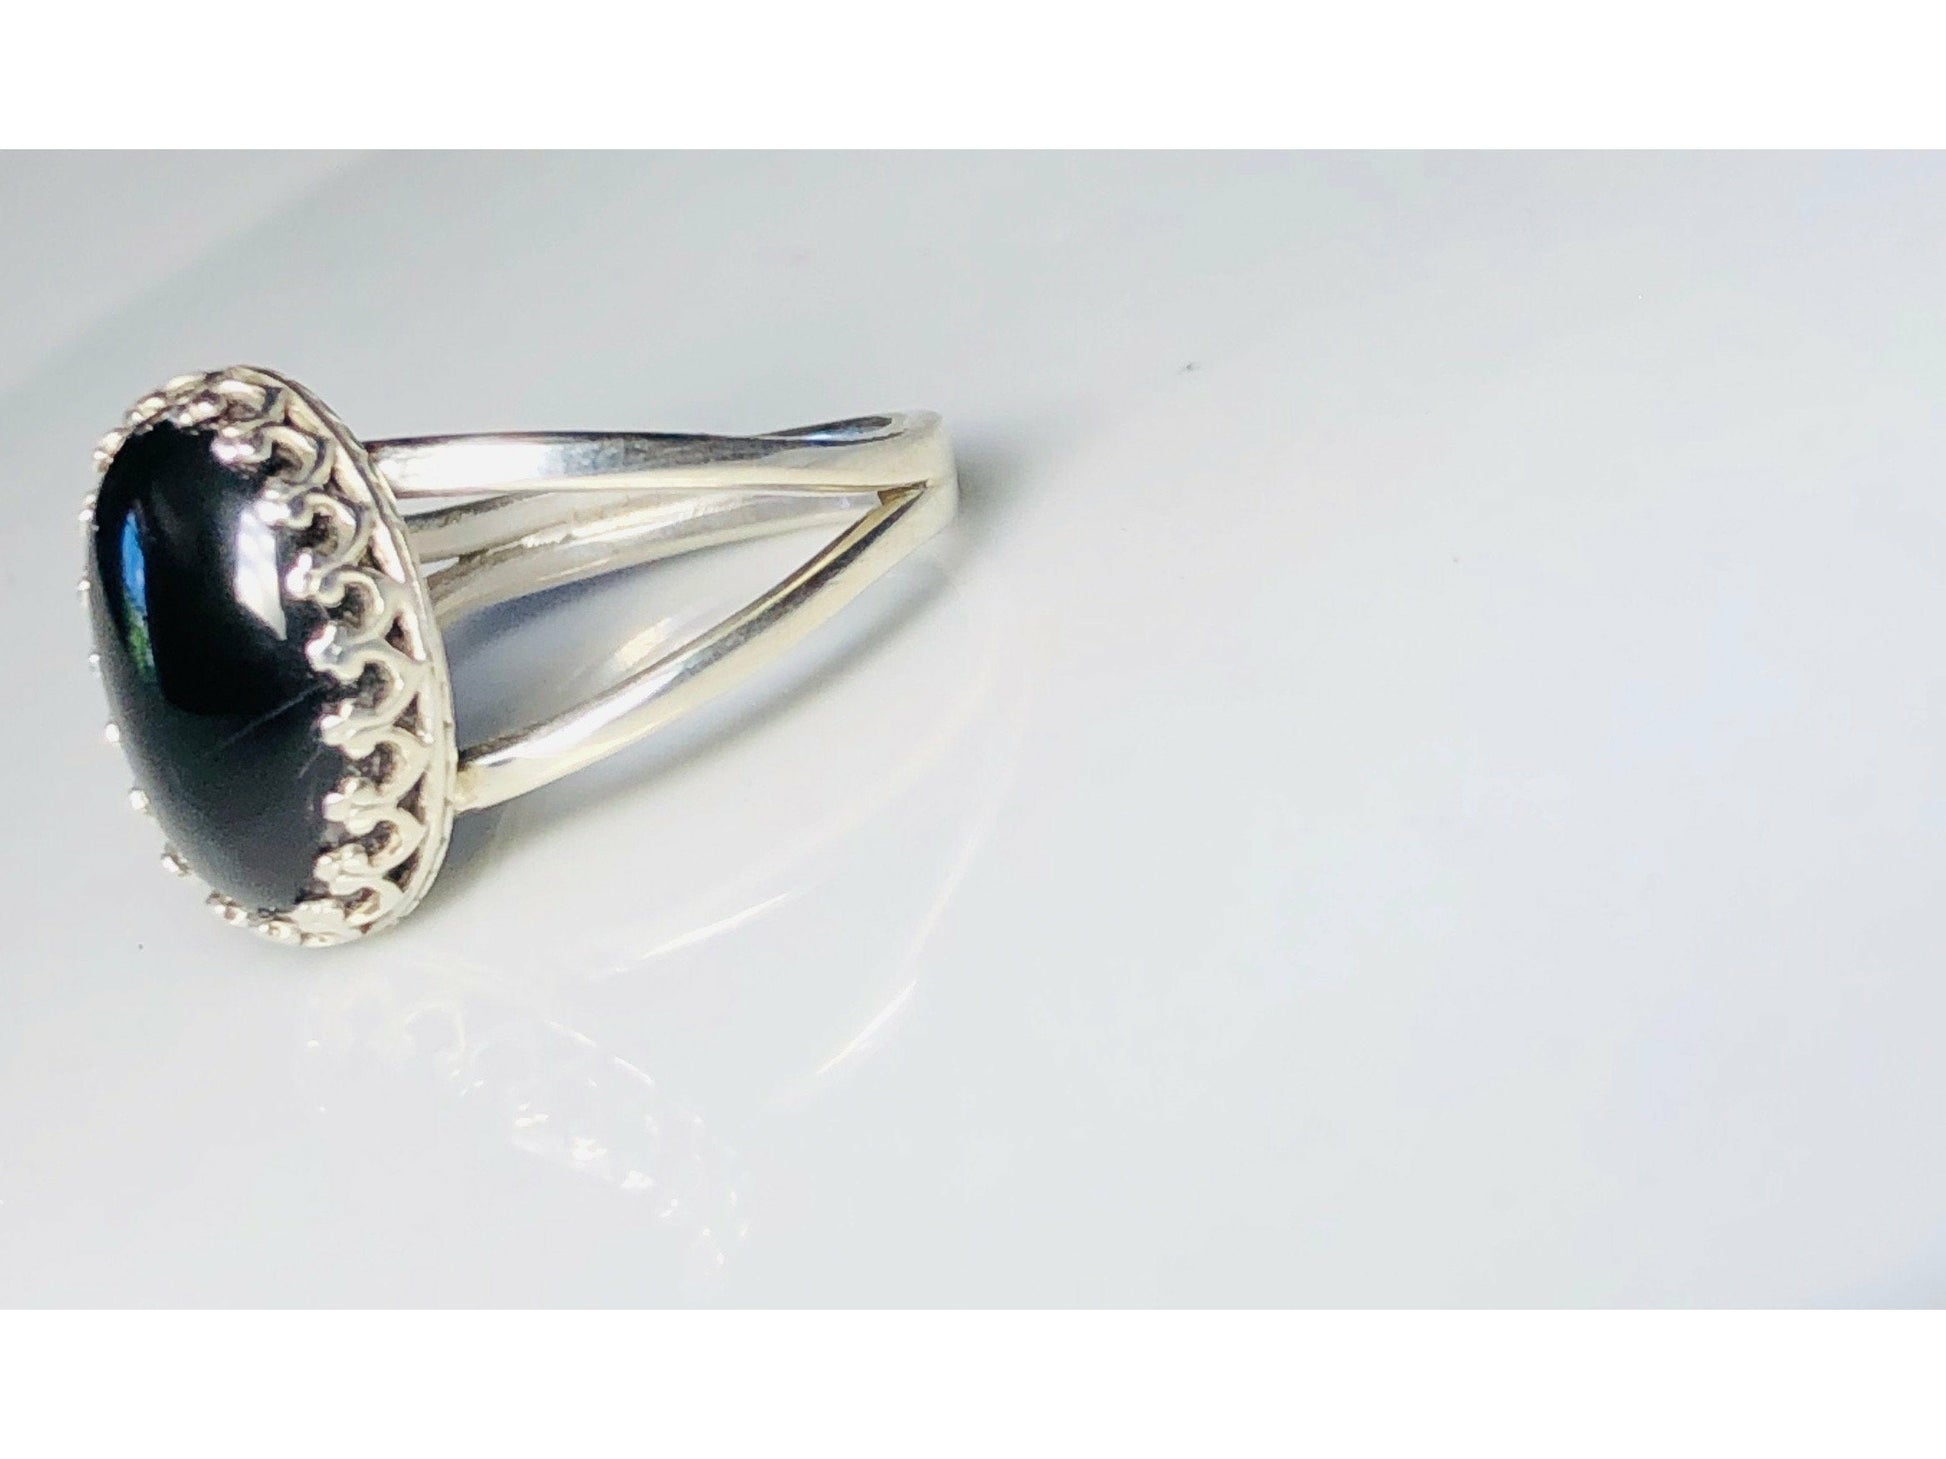 black-onyx-ring-sterling-silver-ring-ring-for-woman-gift-for-her-black-sterling-silver-ring-gift-gemstone-jewelry-gemstone-ring